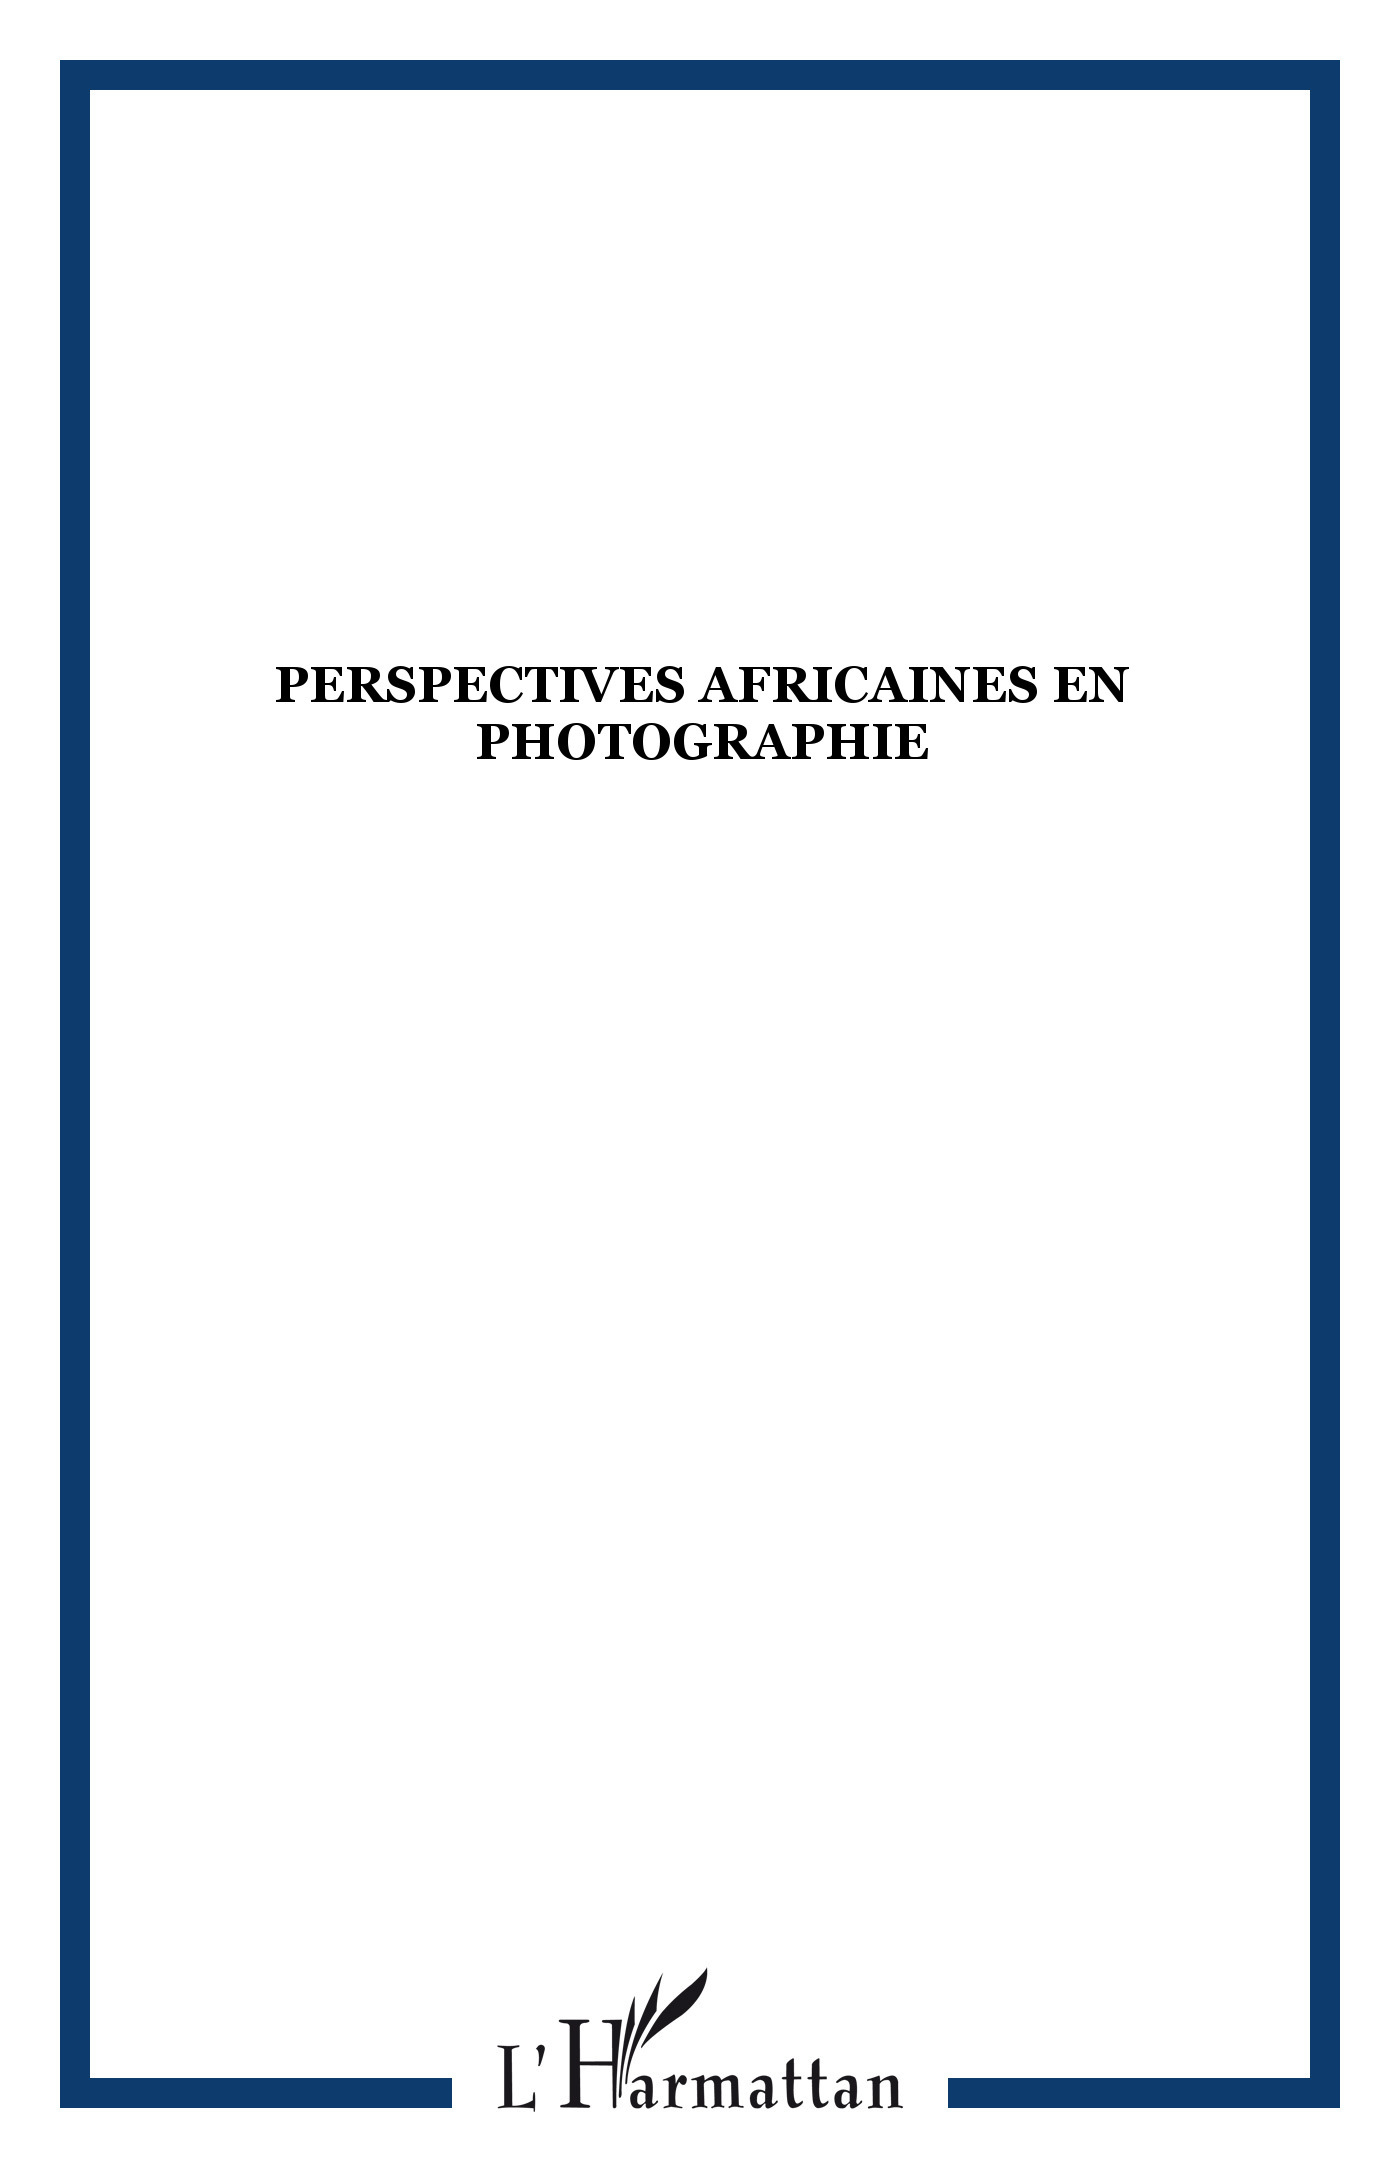 Africultures, Perspectives africaines en photographie (9782296557598-front-cover)